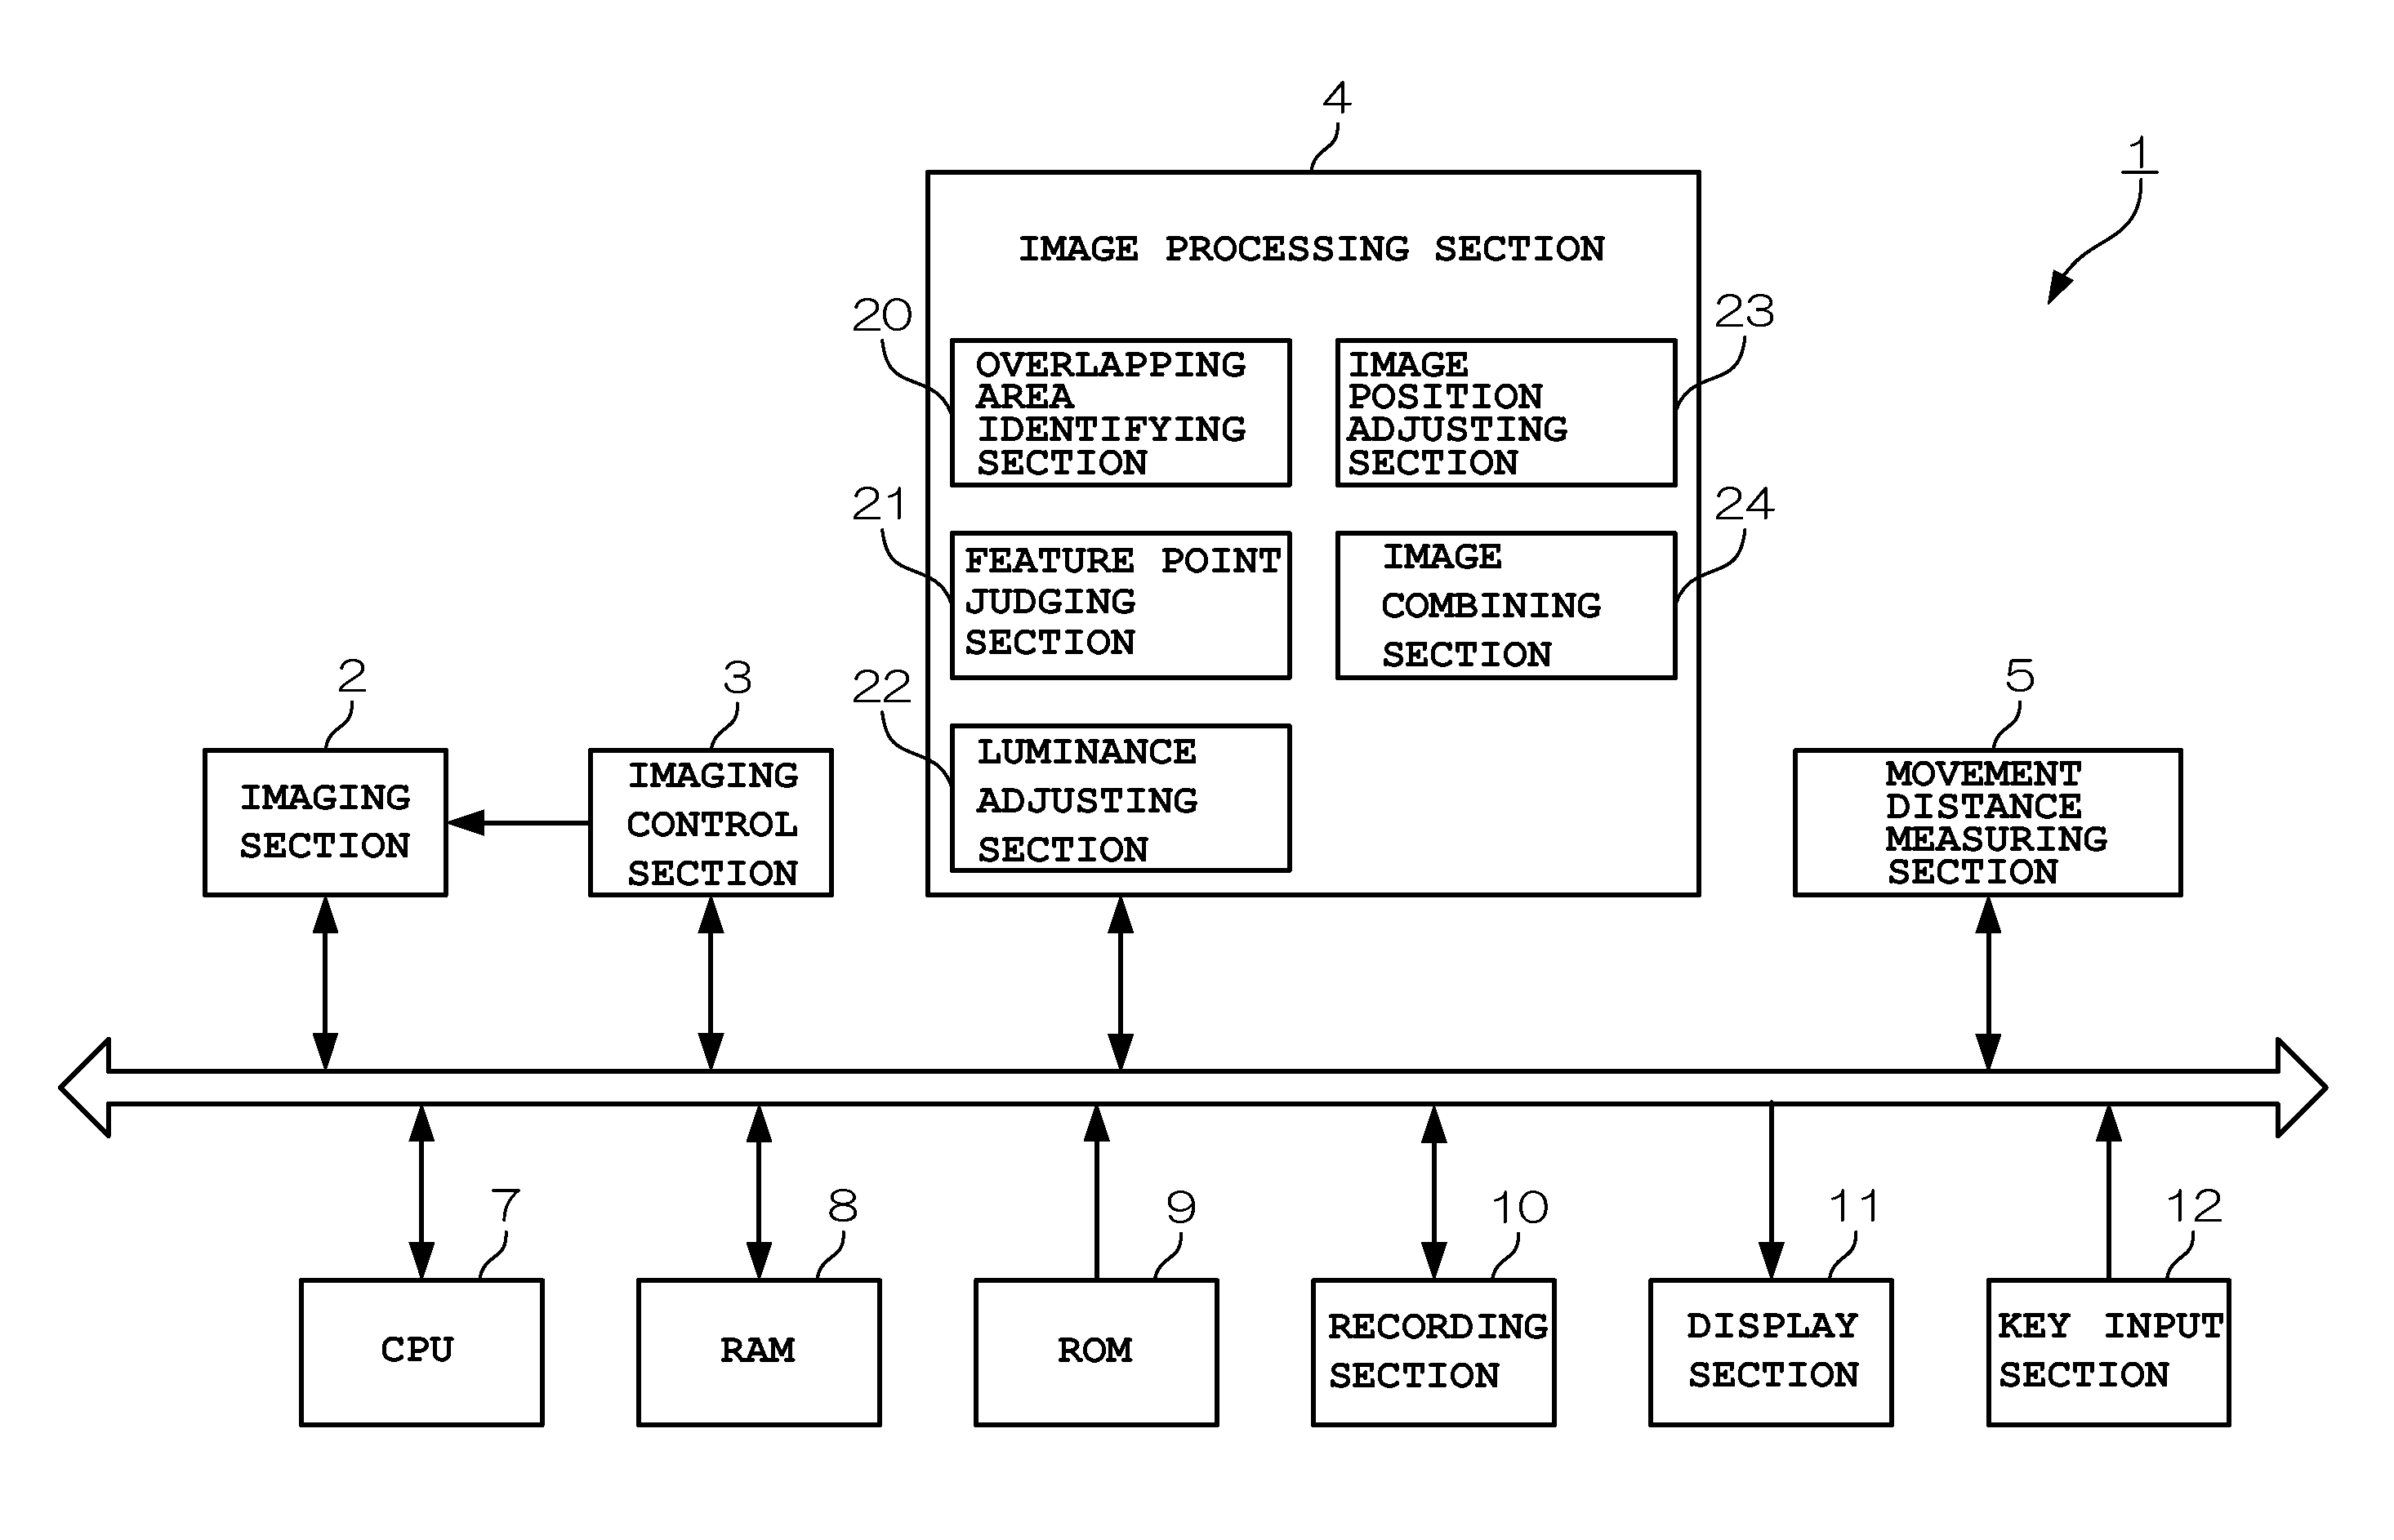 Imaging device capable of combining images